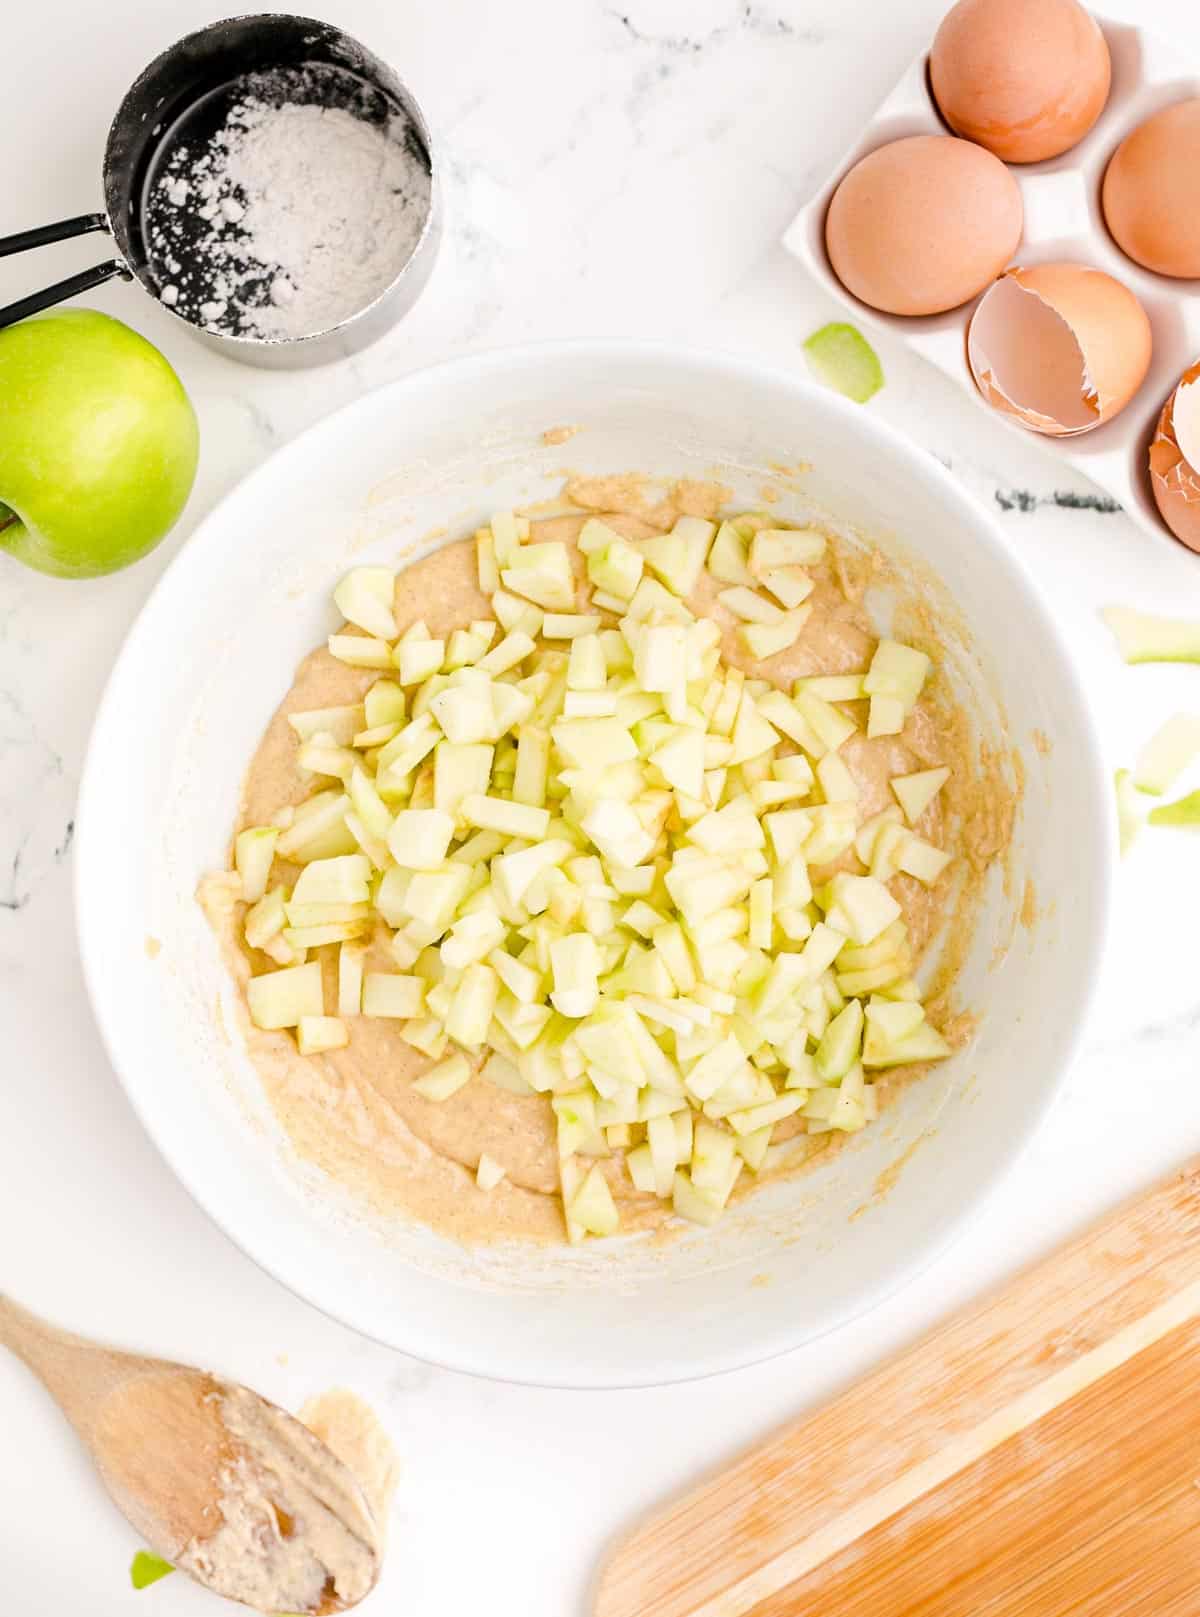 cut up apples in a white bowl with batter